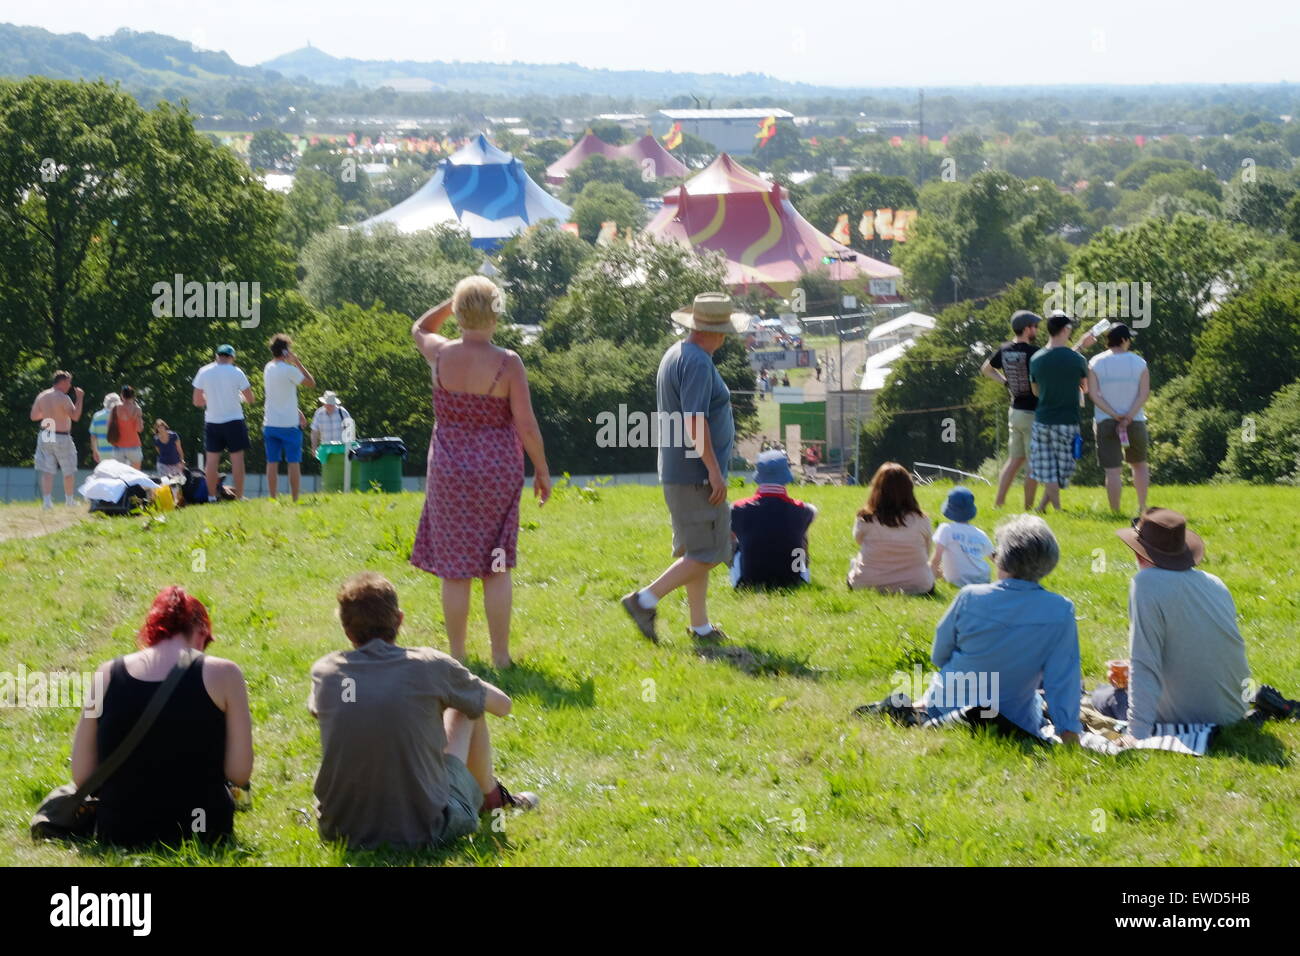 Glastonbury Festival, Somerset, UK. 23 June 2015. Early arrivers  sit on a hillside overlooking the Glastonbury Festival site in anticipation of the gates opening at 8:00 am tomorrow. Credit:  Tom Corban/Alamy Live News Stock Photo